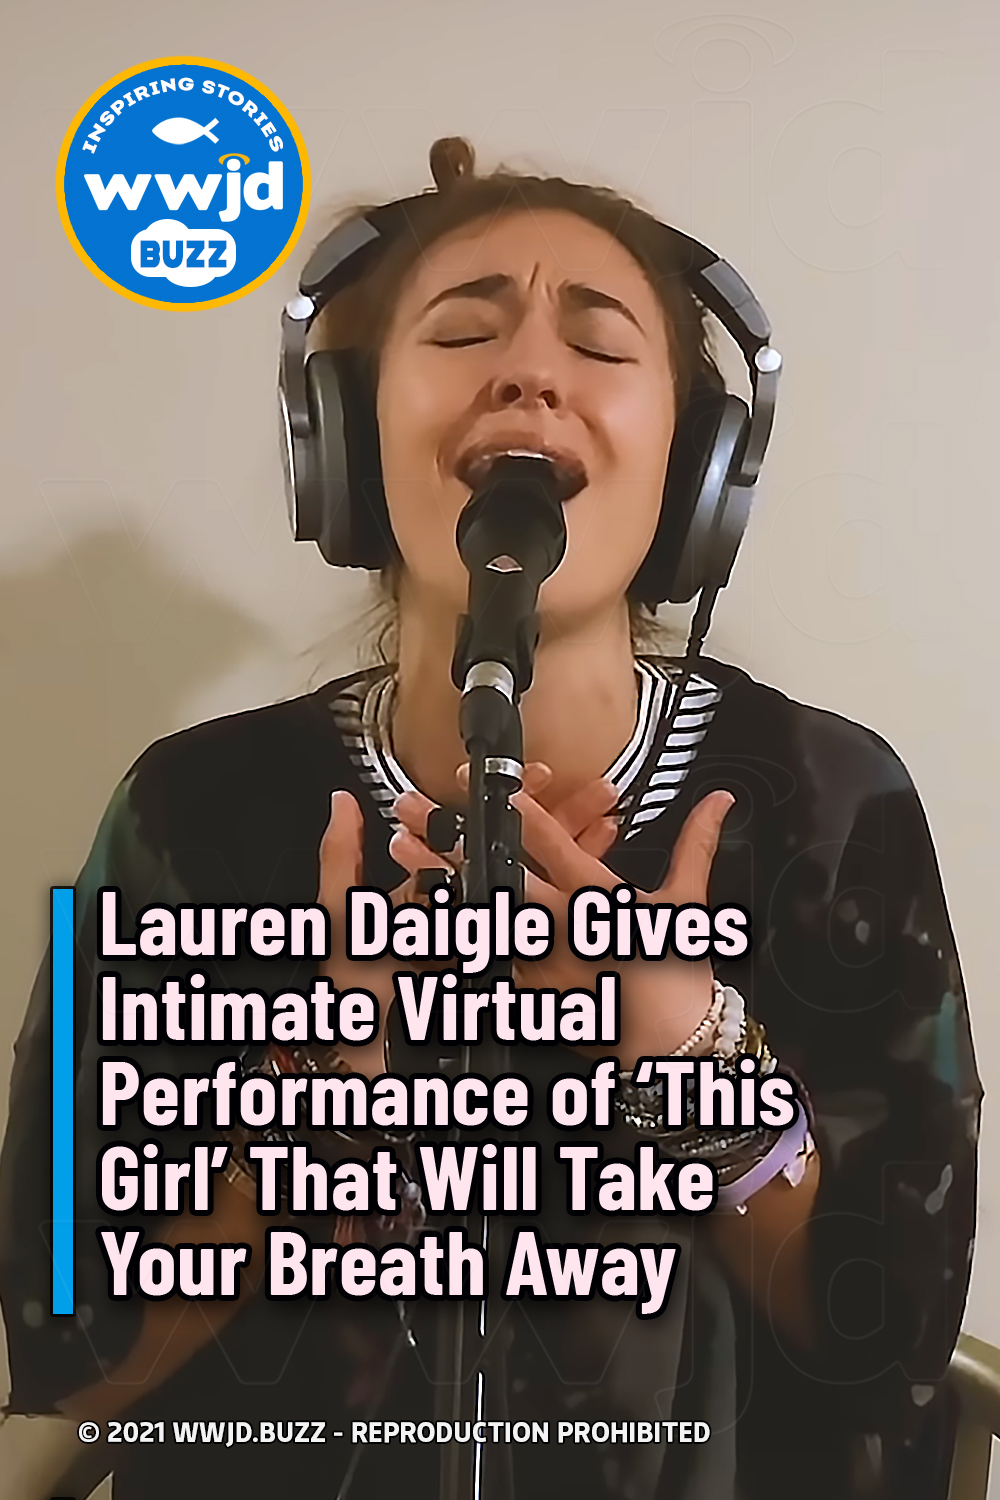 Lauren Daigle Gives Intimate Virtual Performance of ‘This Girl’ That Will Take Your Breath Away